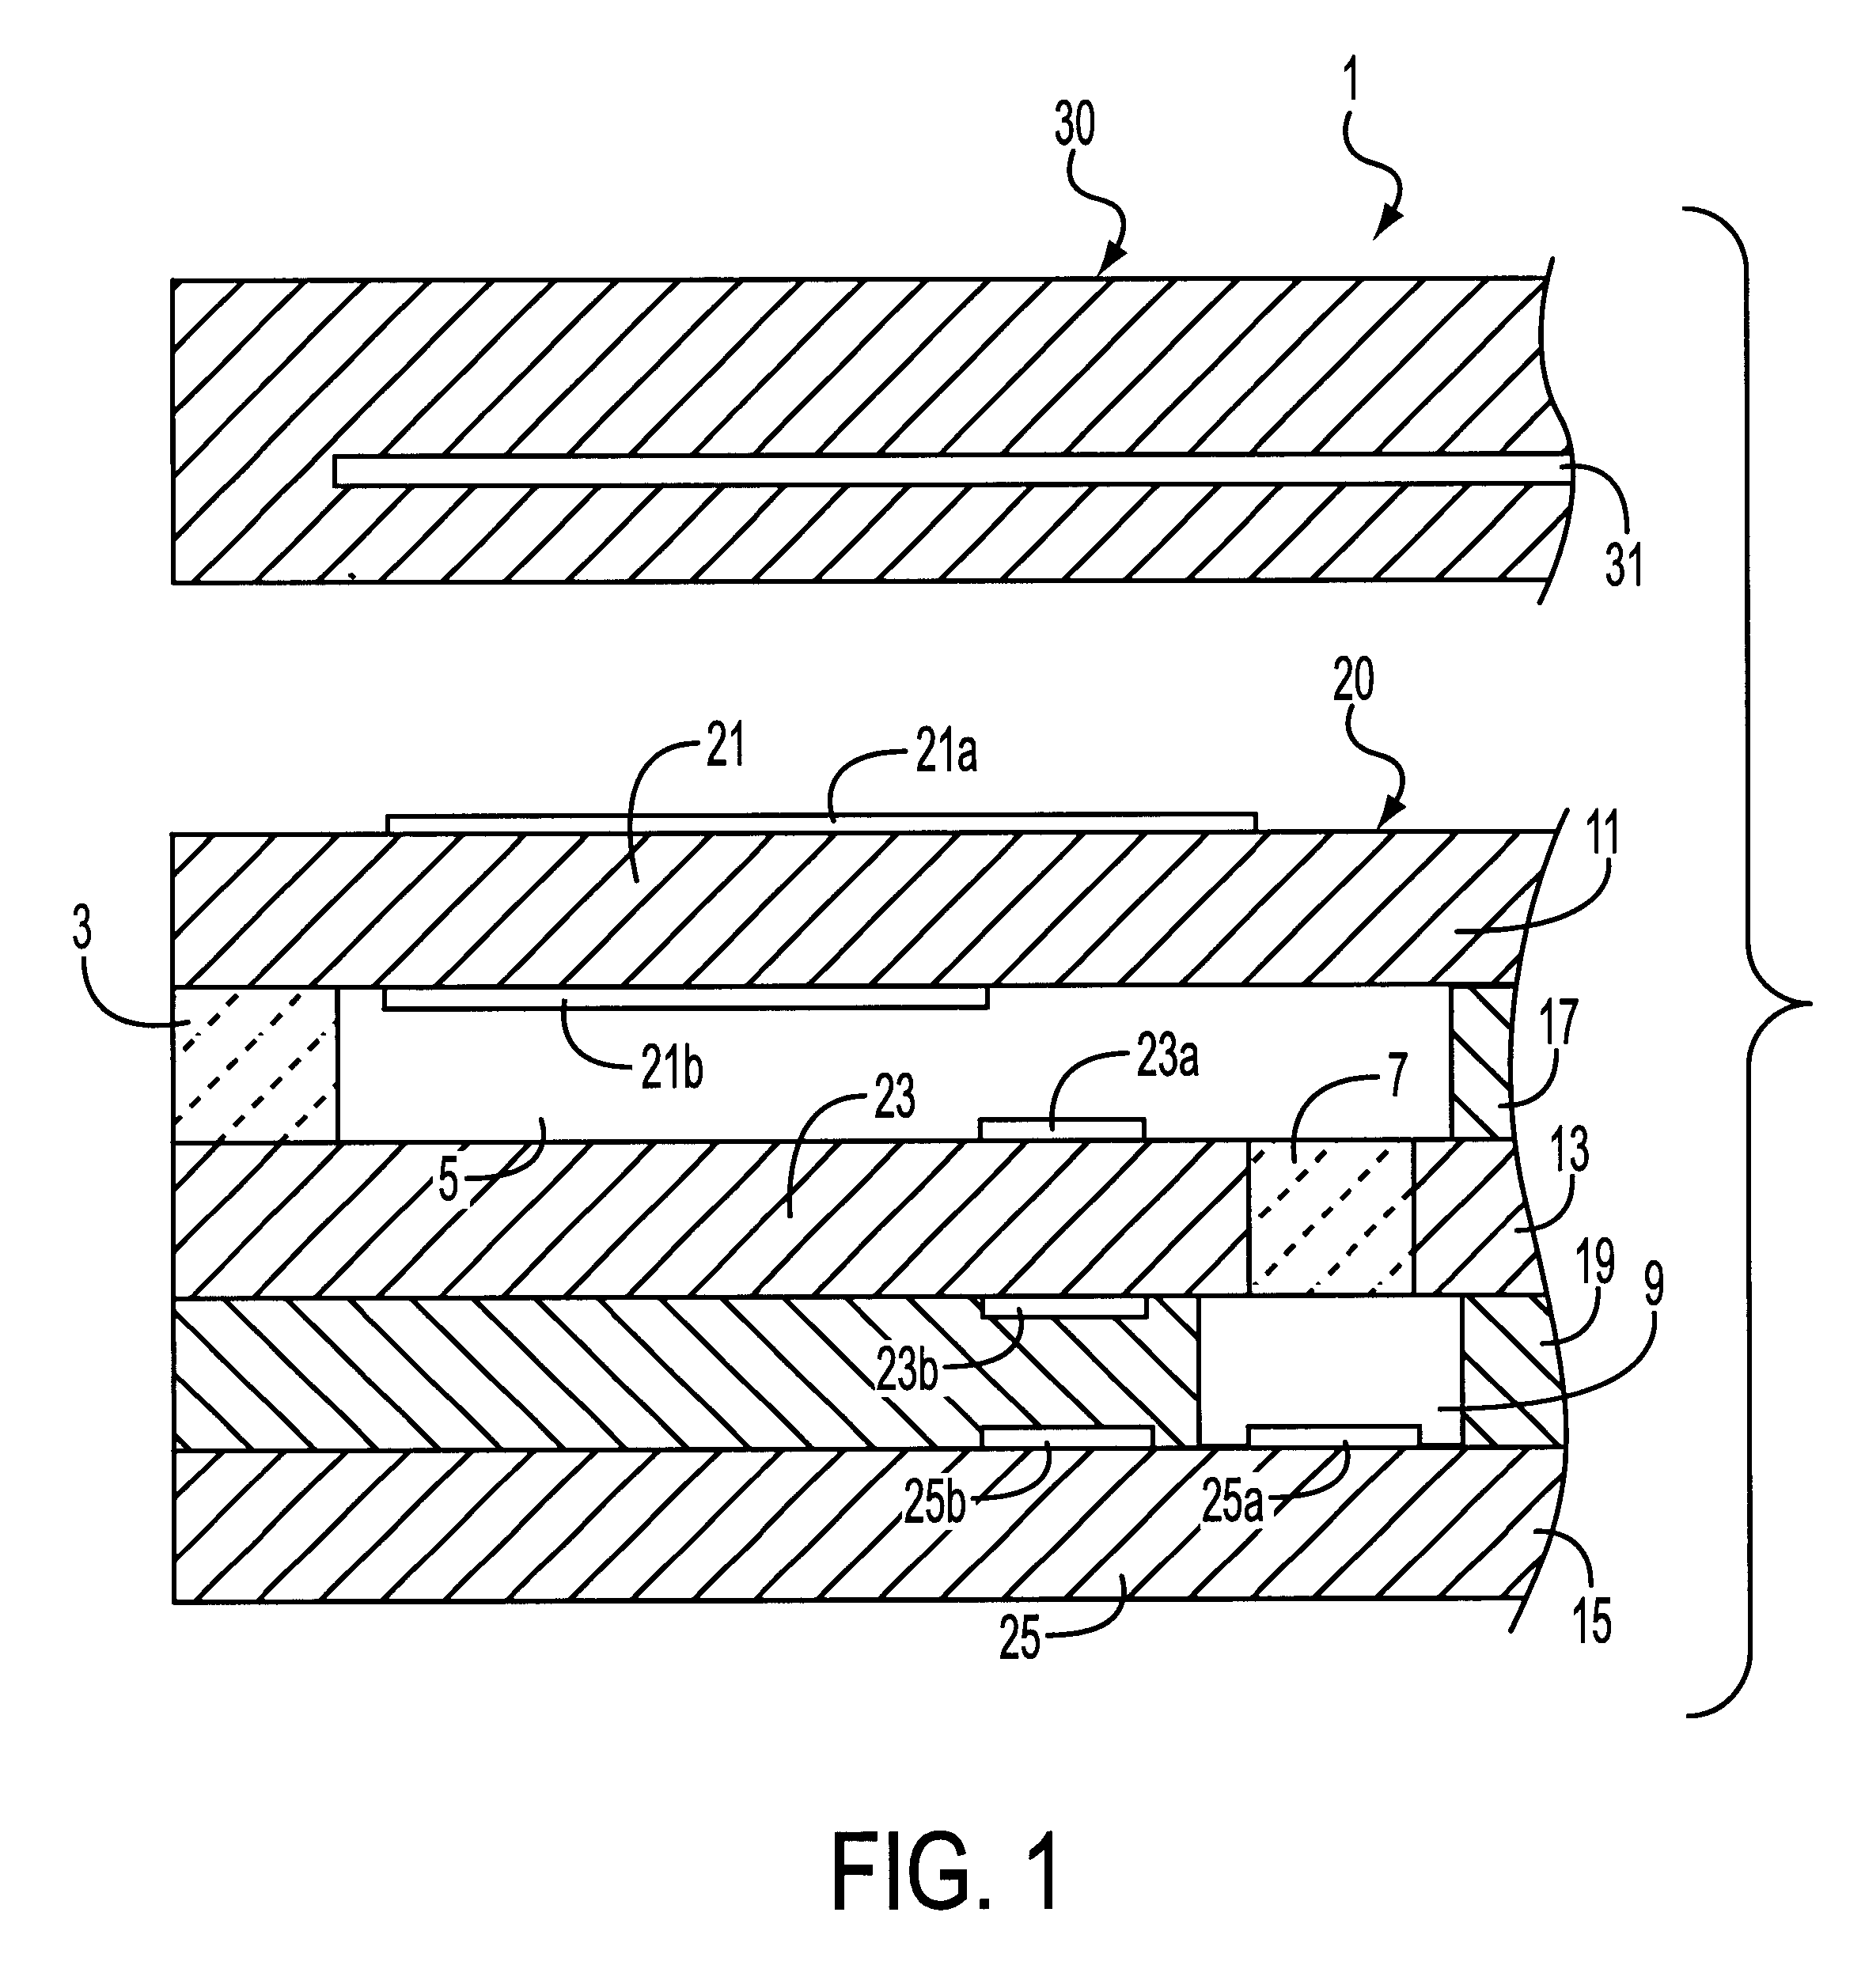 Gas sensor with a high combined resistance to lead wire resistance ratio